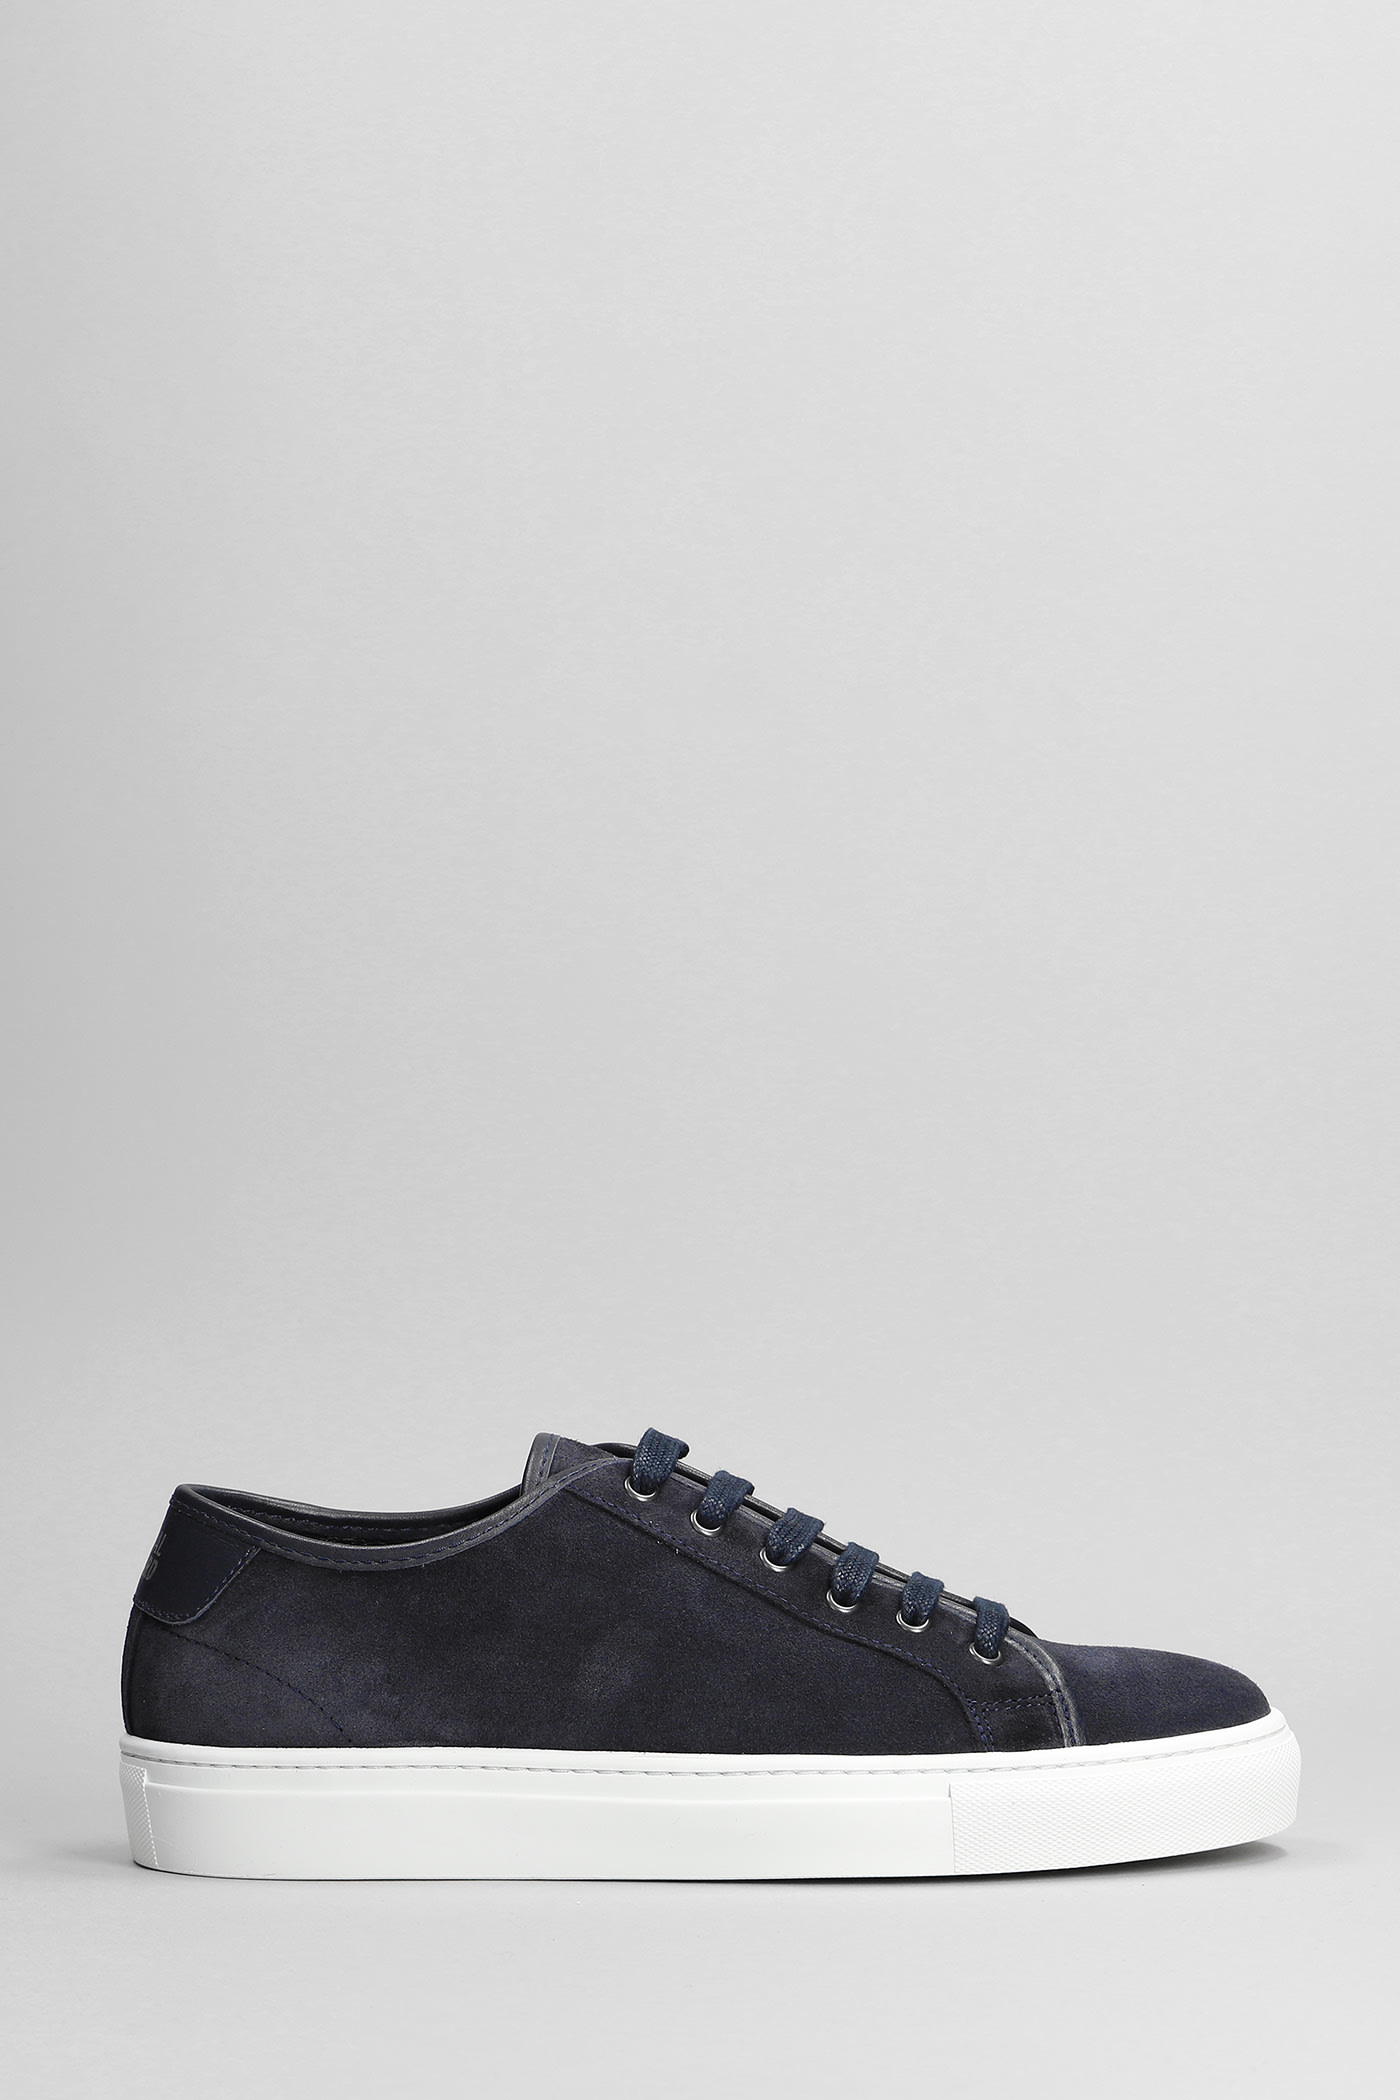 NATIONAL STANDARD EDITION 3 SNEAKERS IN BLUE SUEDE